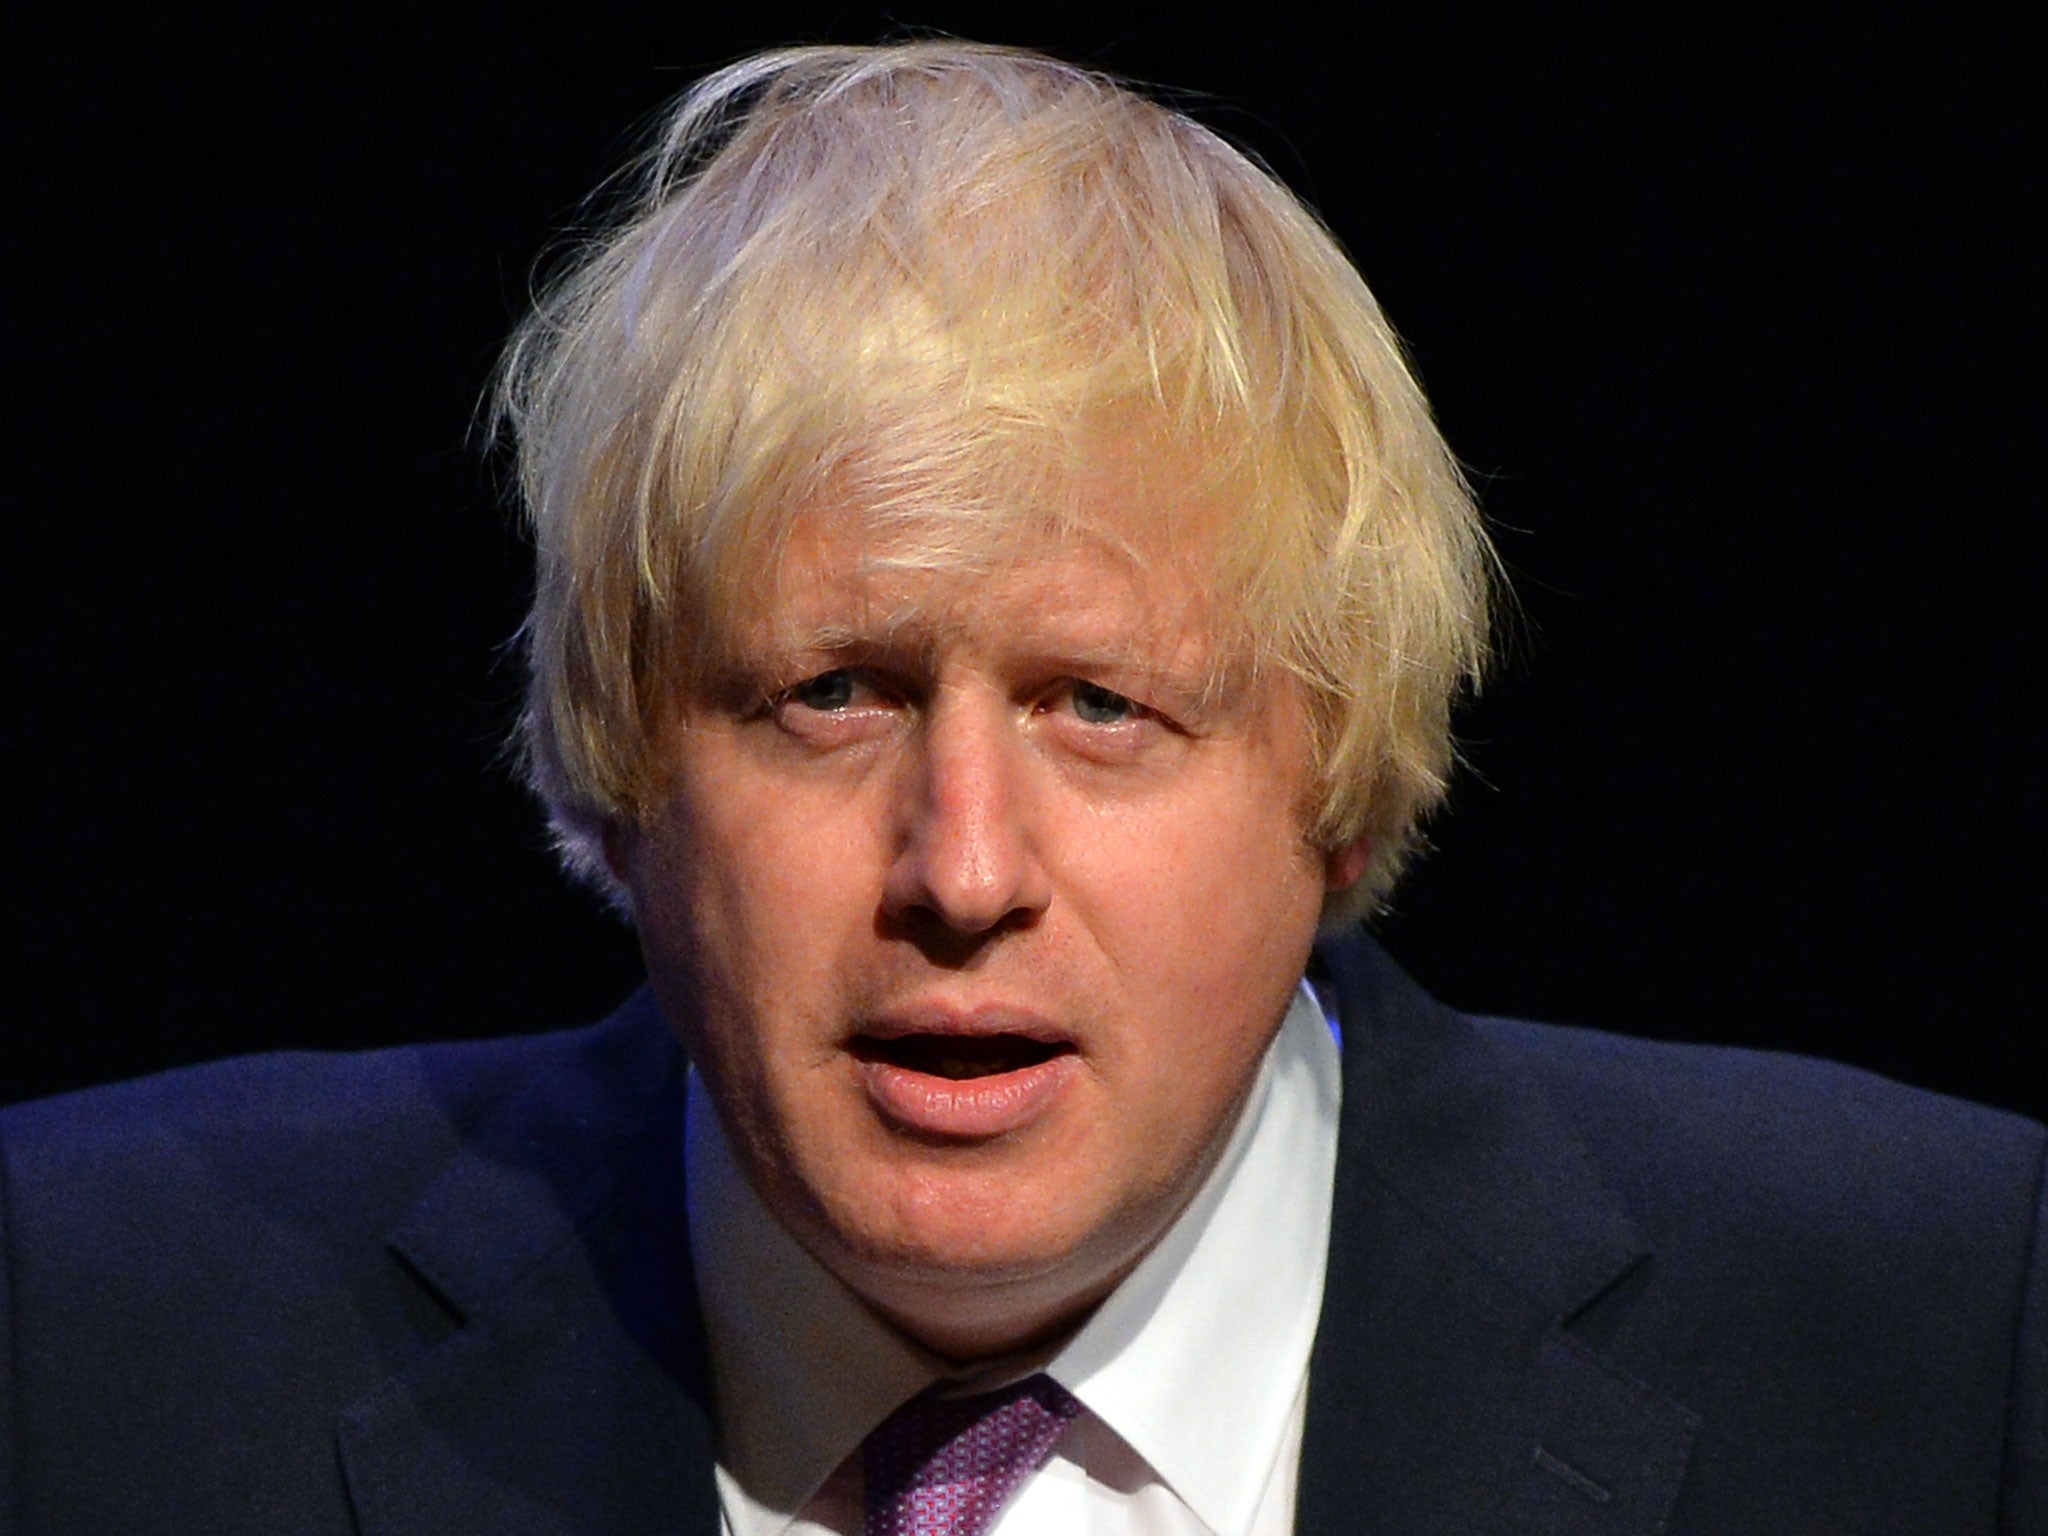 Boris Johnson says he has 'little doubt' Ebola will come to the UK, and 'probably London'